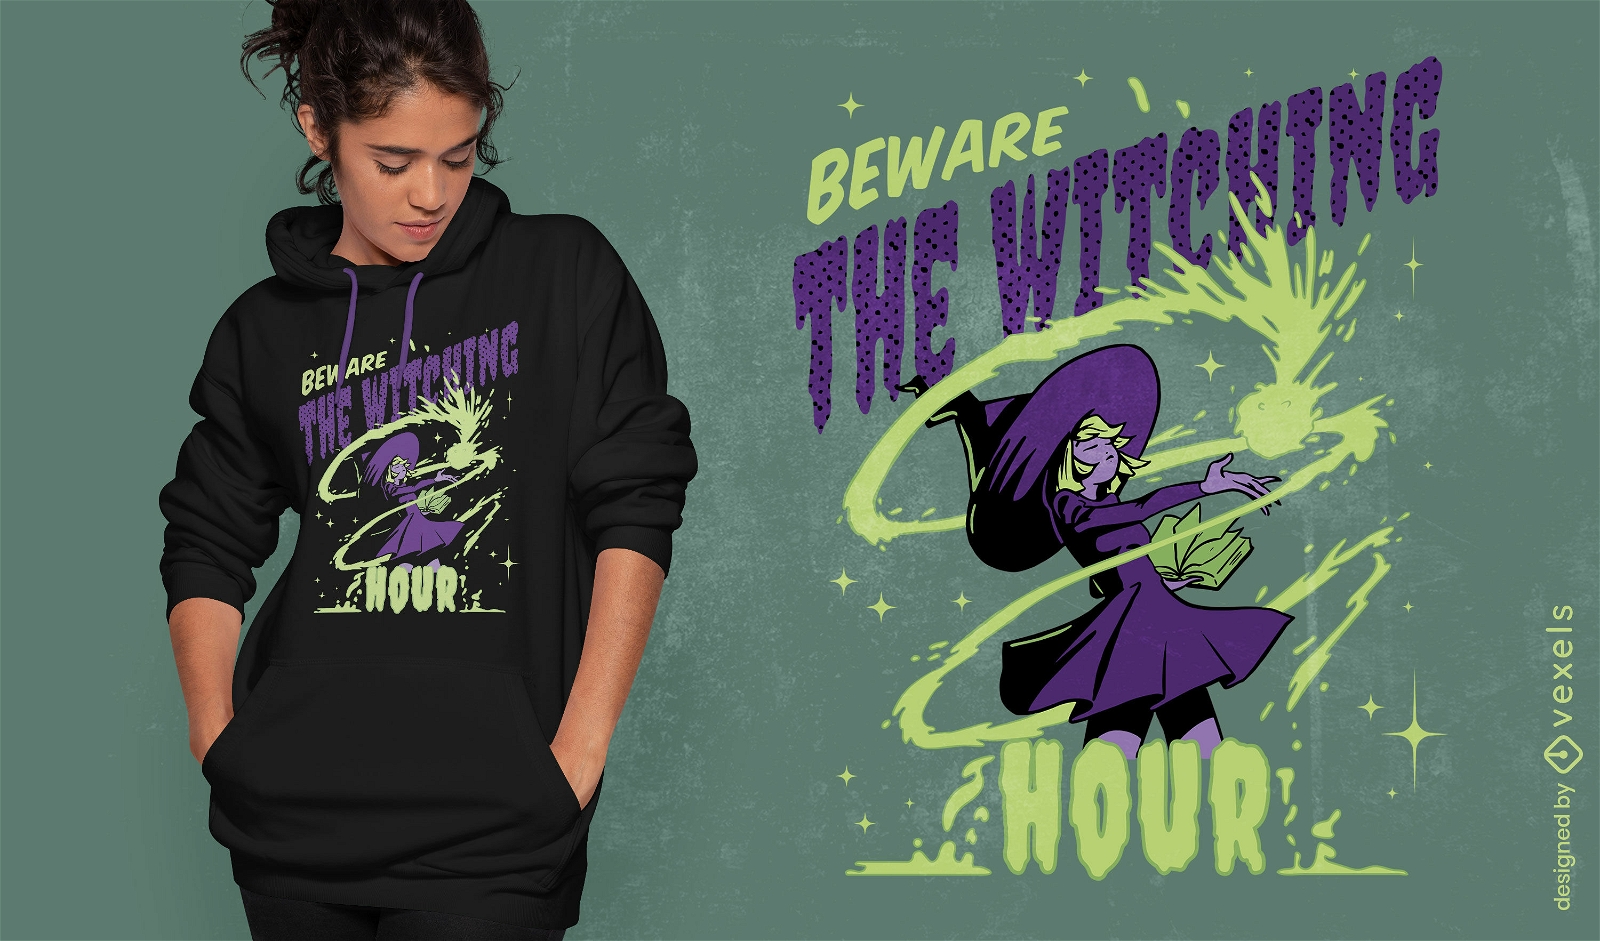 Witching hour Halloween t-shirt design